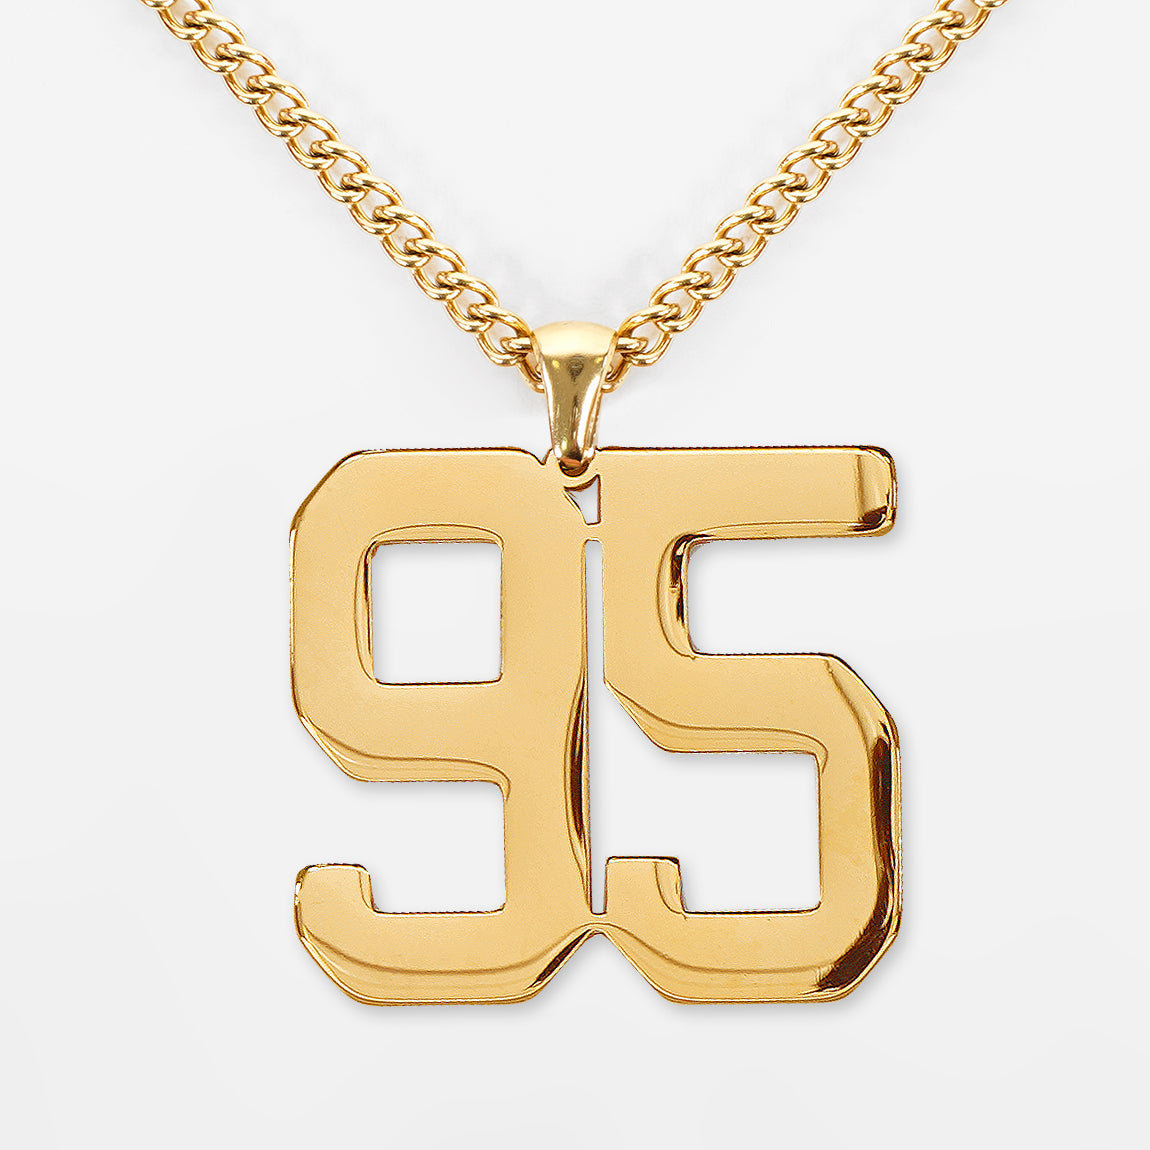 95 Number Pendant with Chain Kids Necklace - Gold Plated Stainless Steel